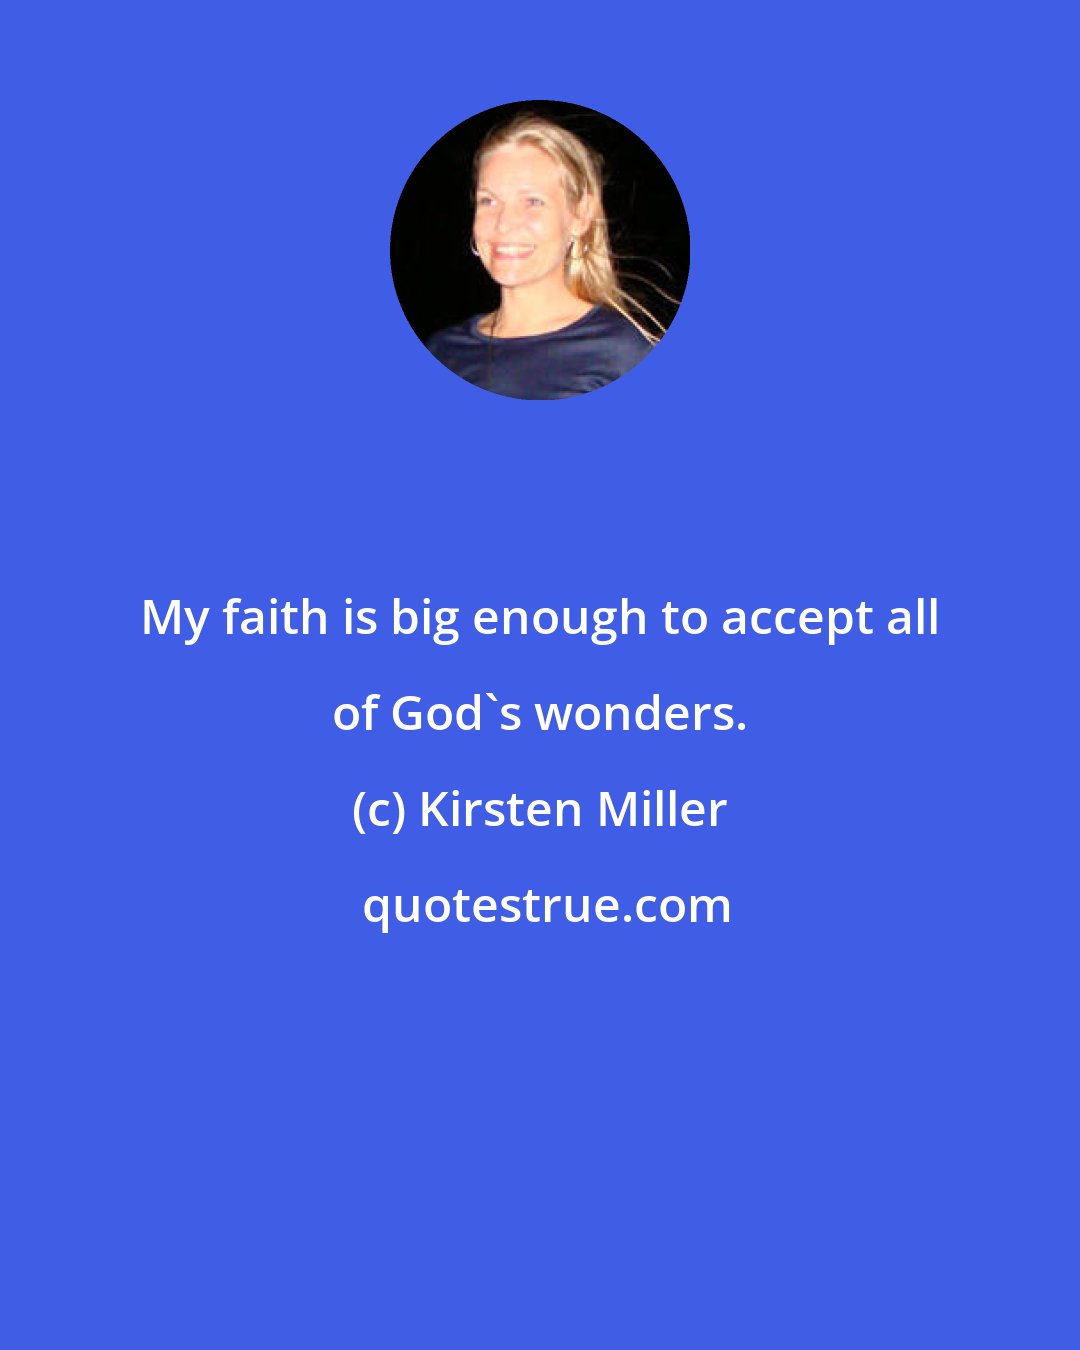 Kirsten Miller: My faith is big enough to accept all of God's wonders.